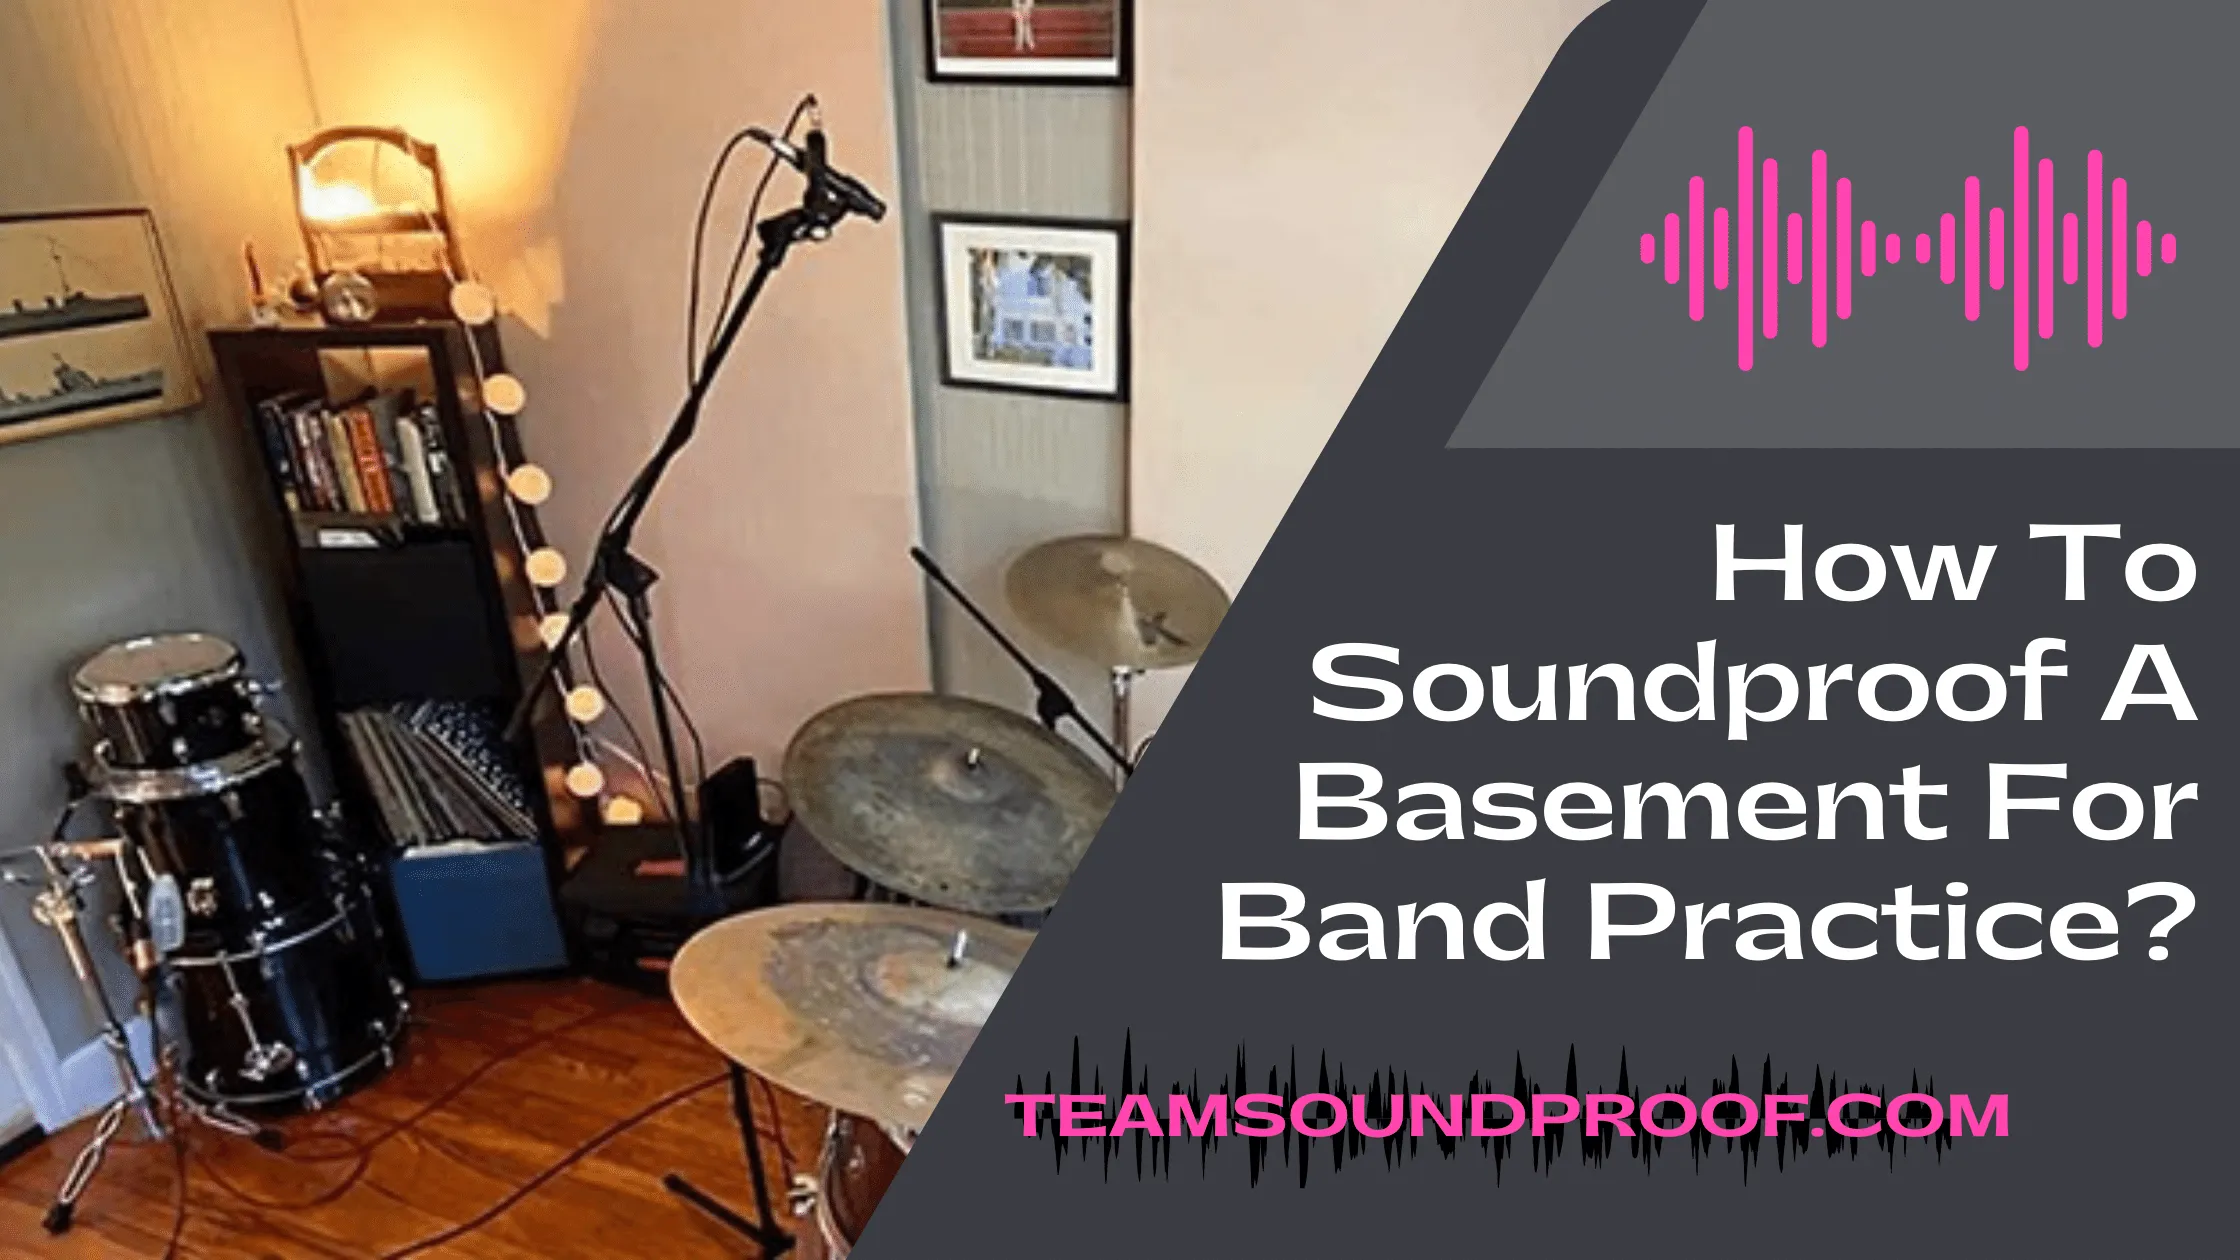 How To Soundproof A Basement For Band Practice?